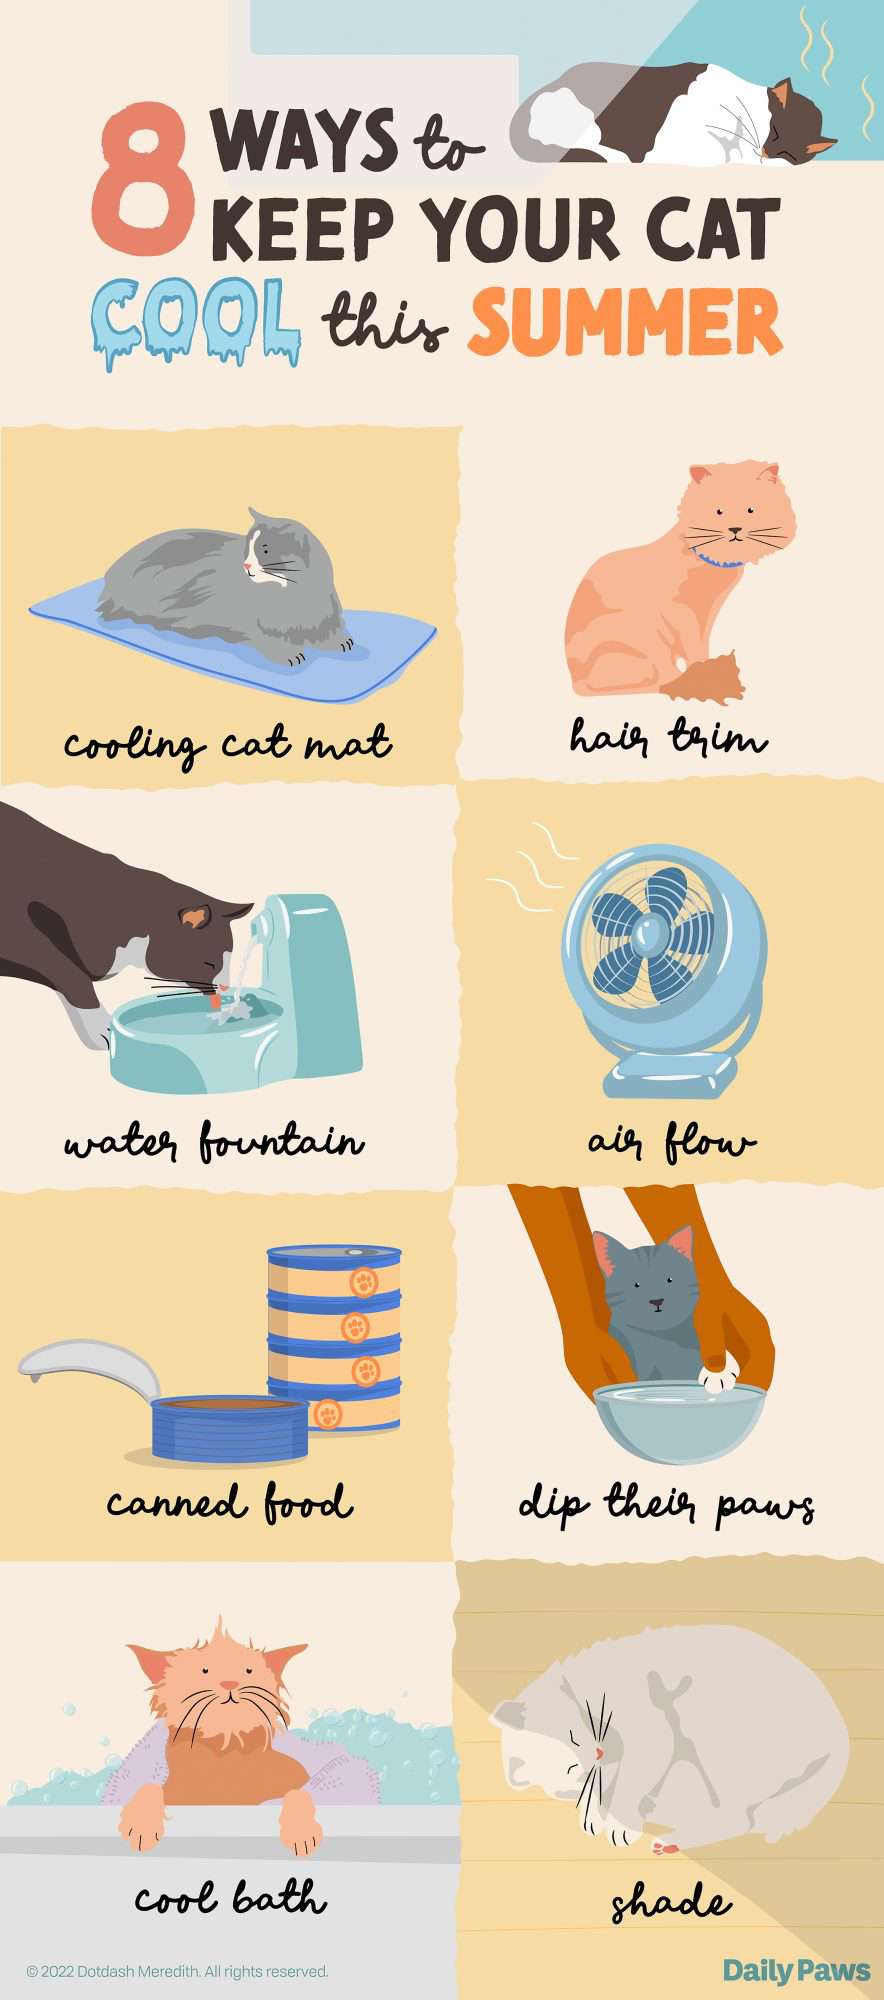 Infographic showing 8 ways to keep a cat cool in the summer